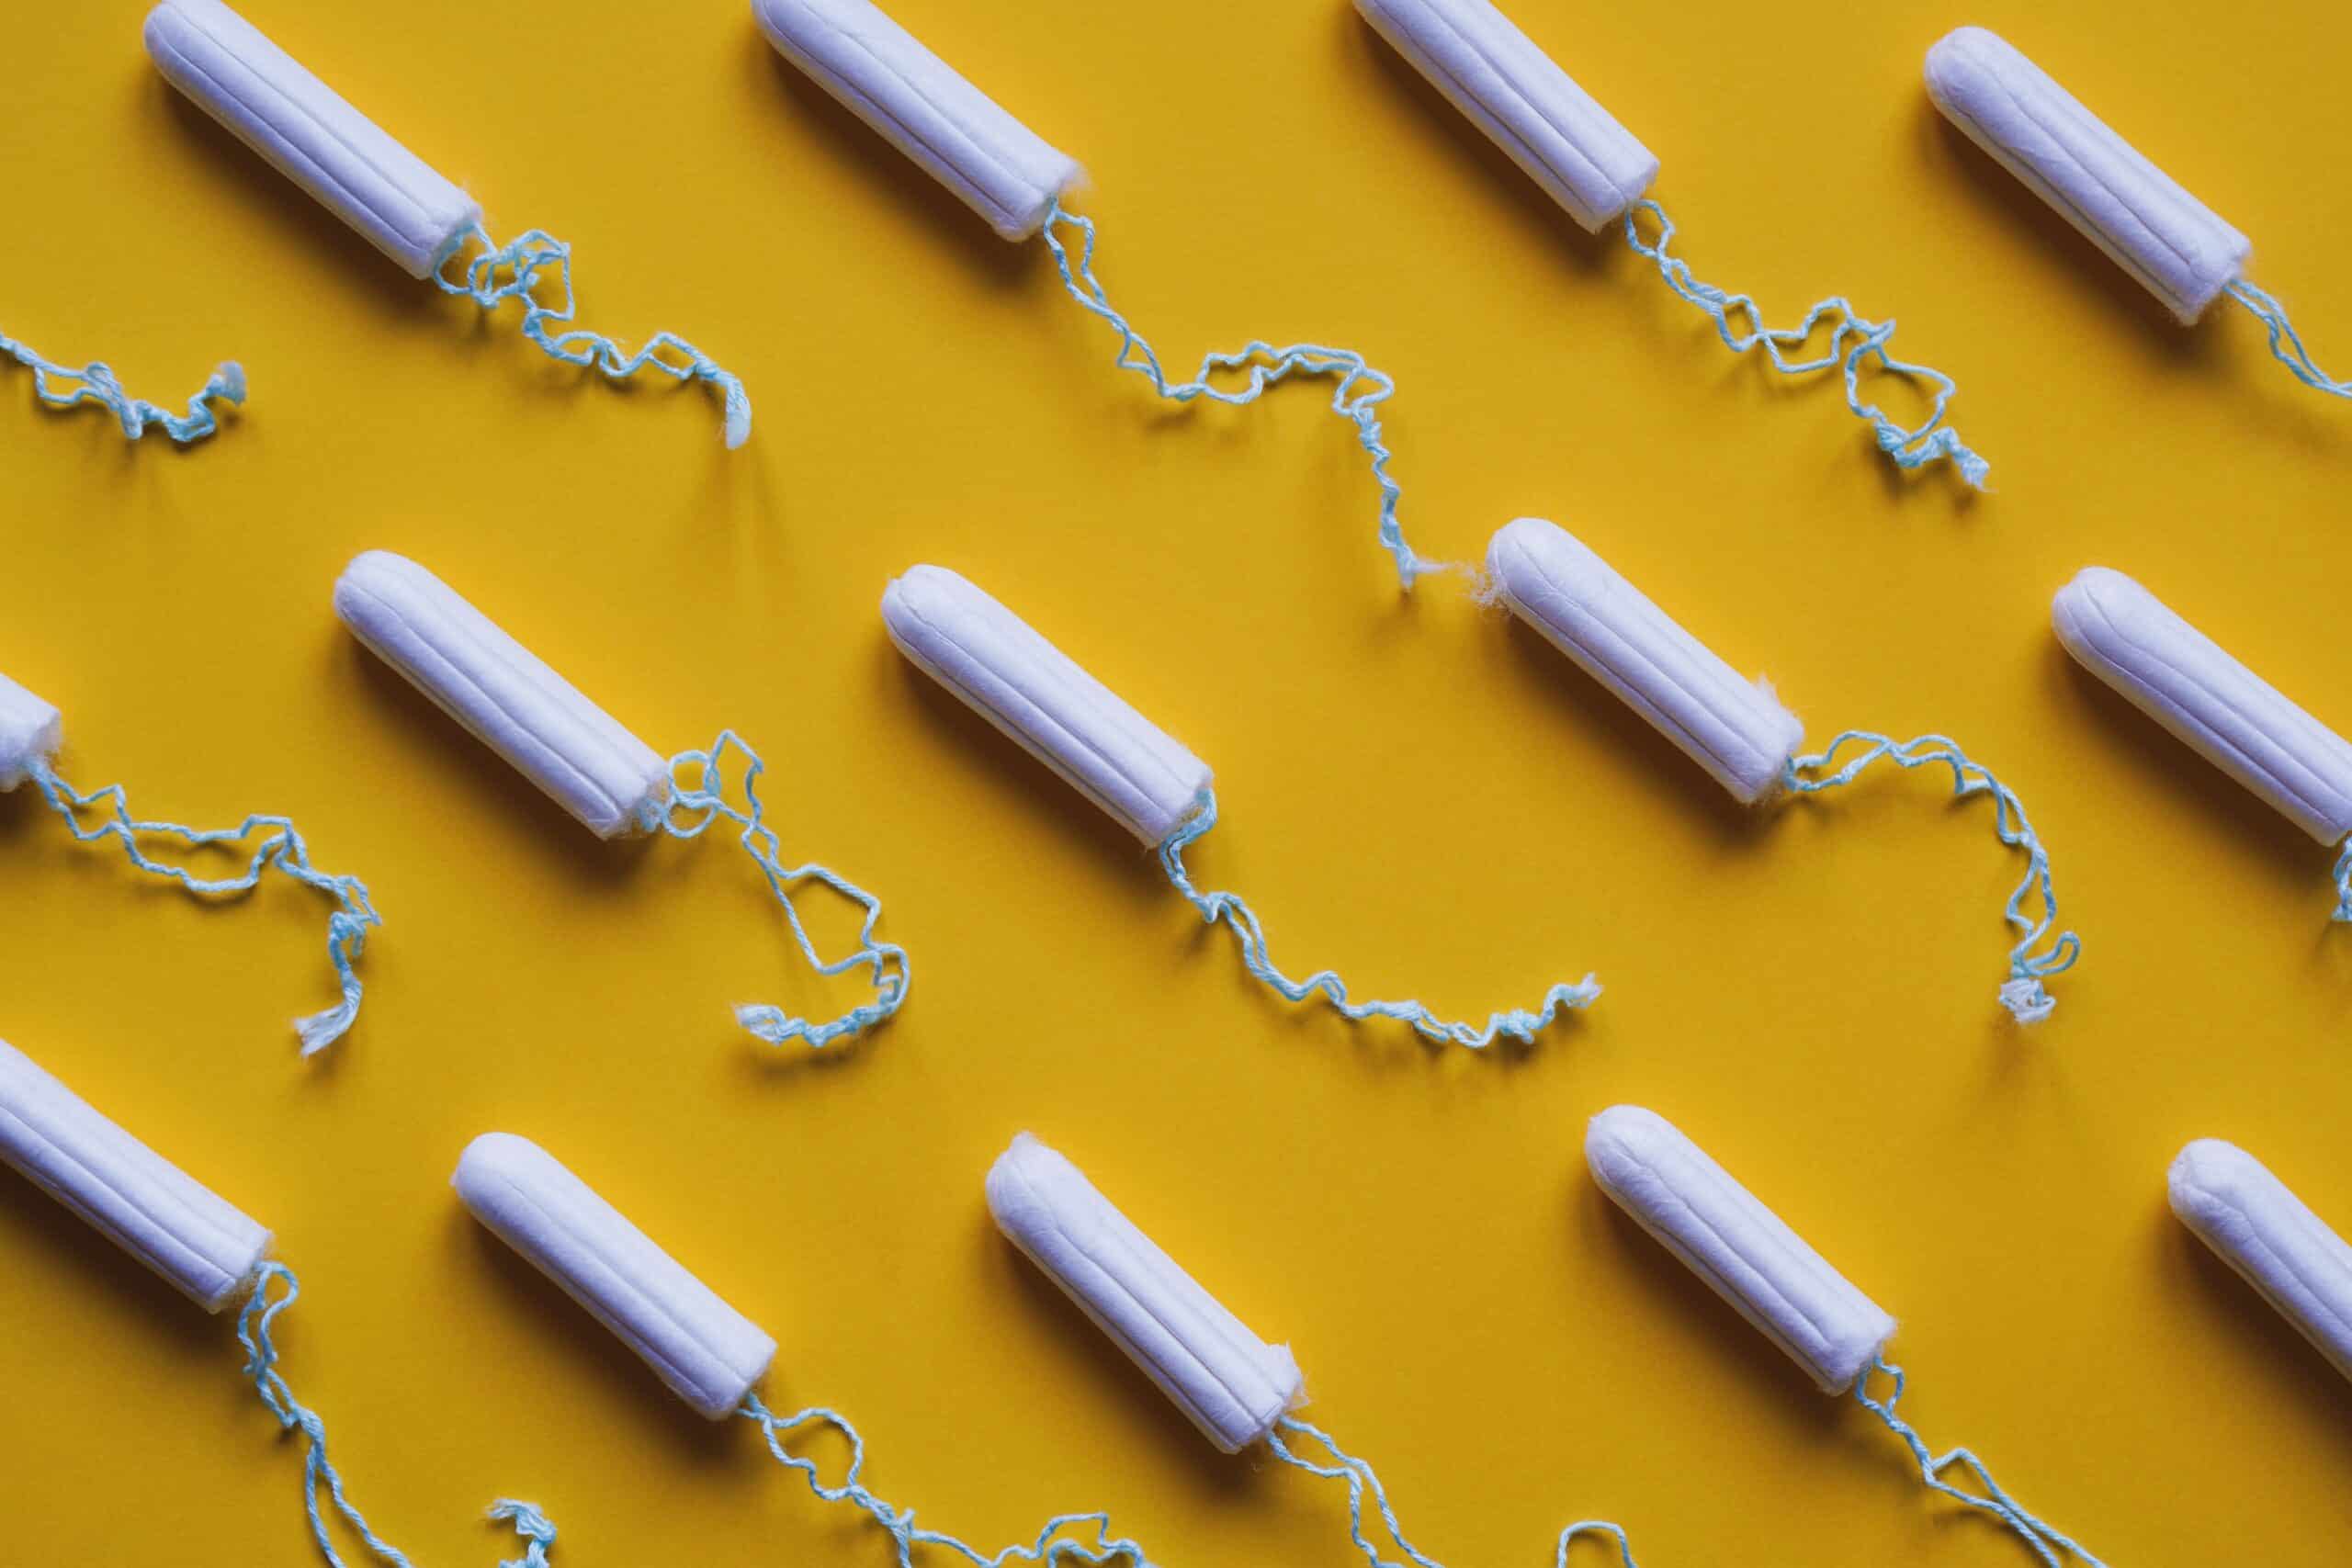 tampon flat lay - many tampons arrangement in rows - period or menstruation concept